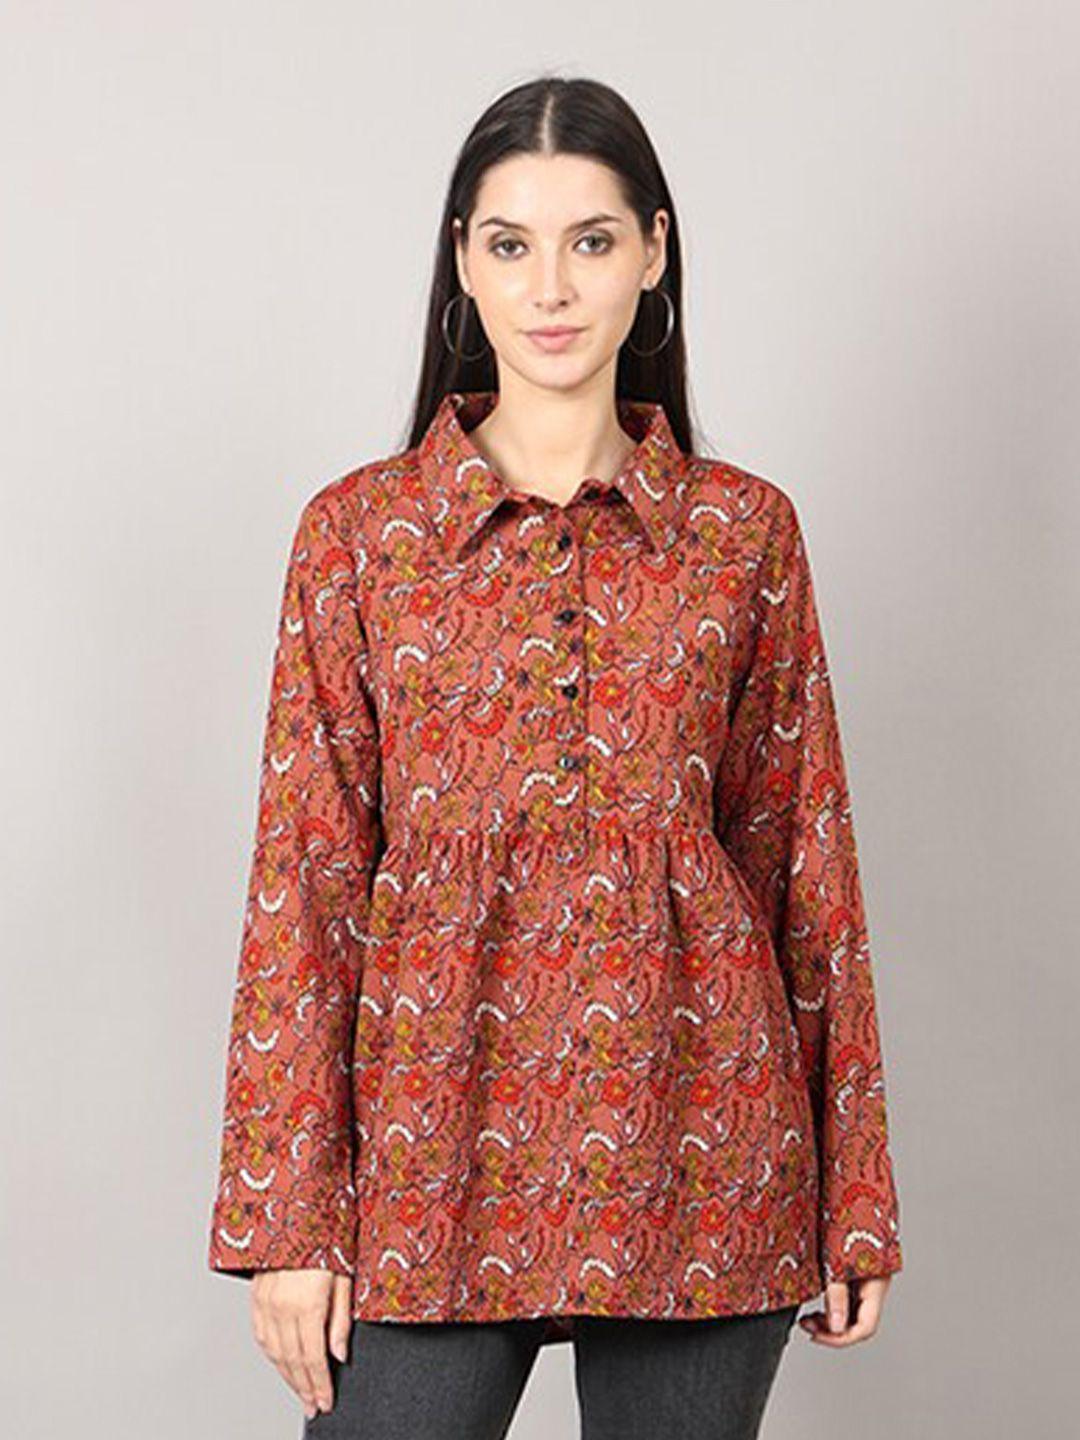 maiyee brown floral printed shirt style top